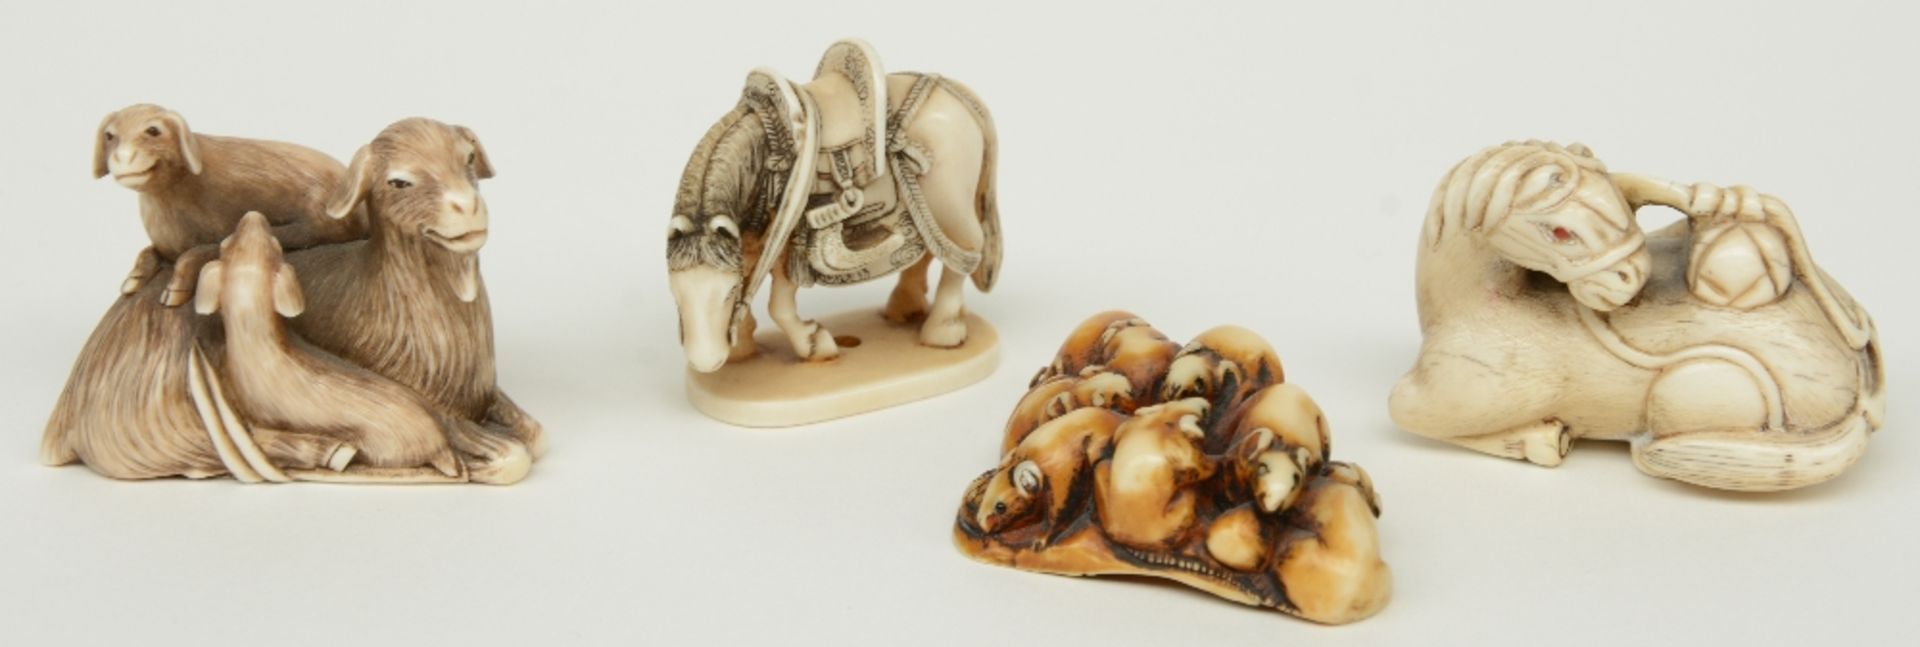 Four late Edo period Japanese ivory katabori-netsuke, two in the form of horses, one in the form